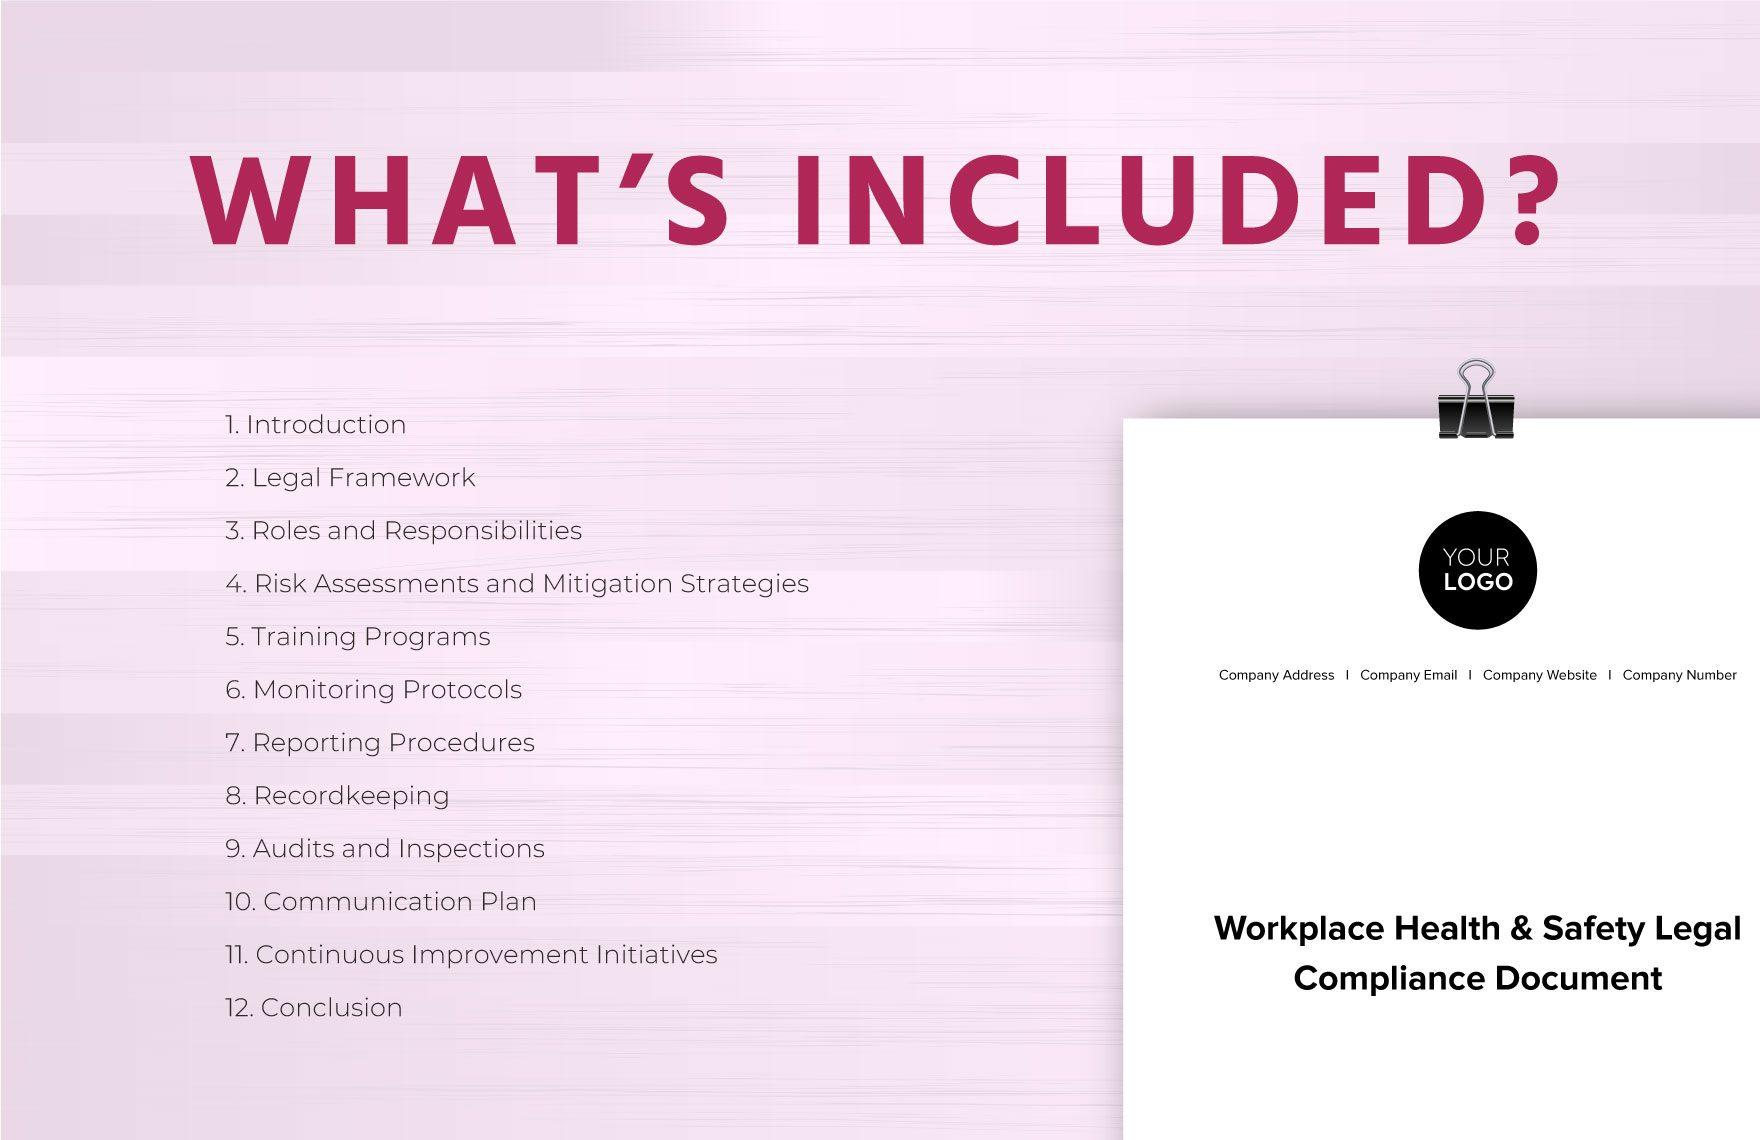 Workplace Health & Safety Legal Compliance Document Template